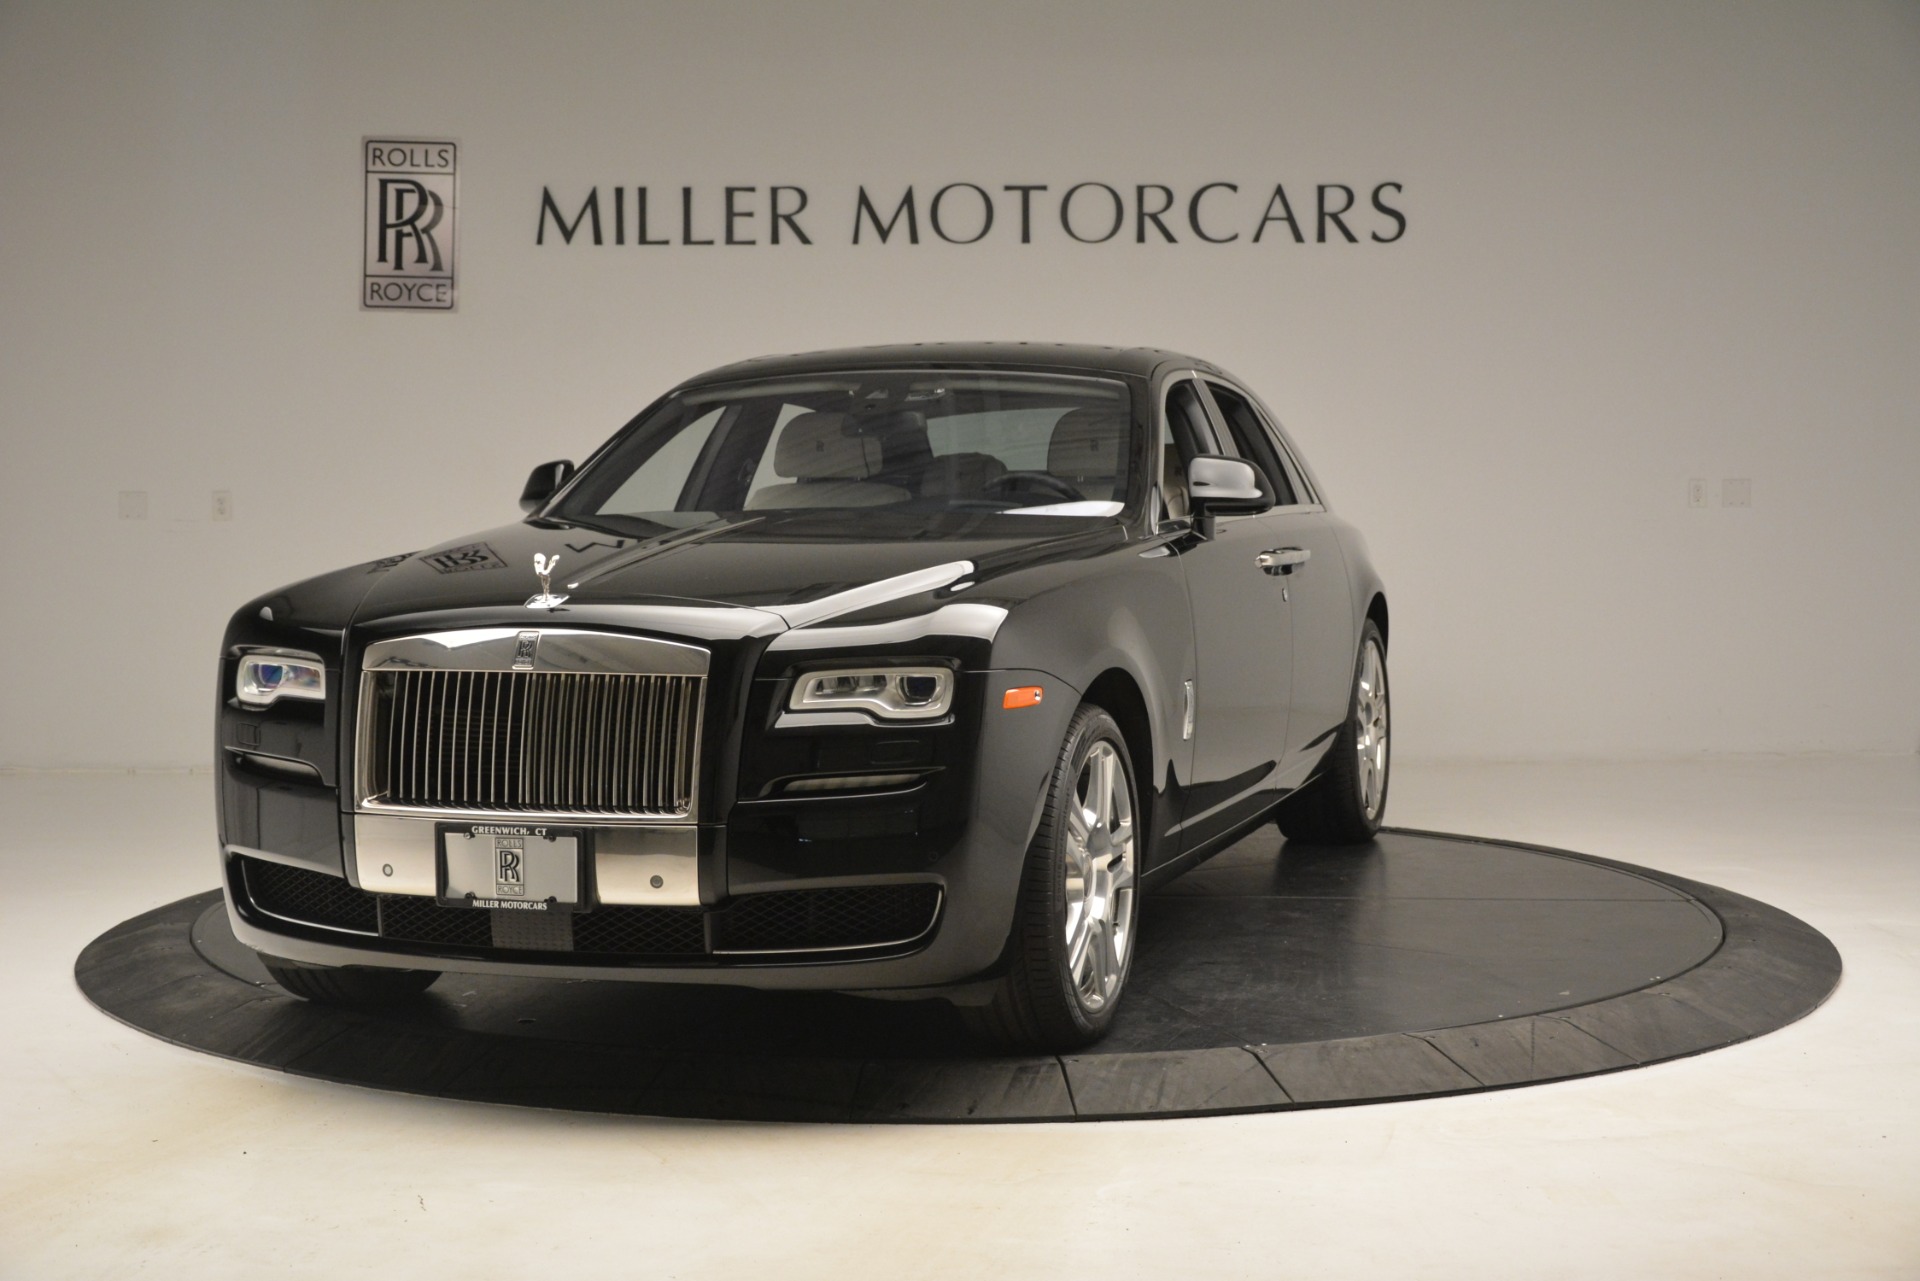 Used 2016 Rolls-Royce Ghost for sale Sold at Bugatti of Greenwich in Greenwich CT 06830 1